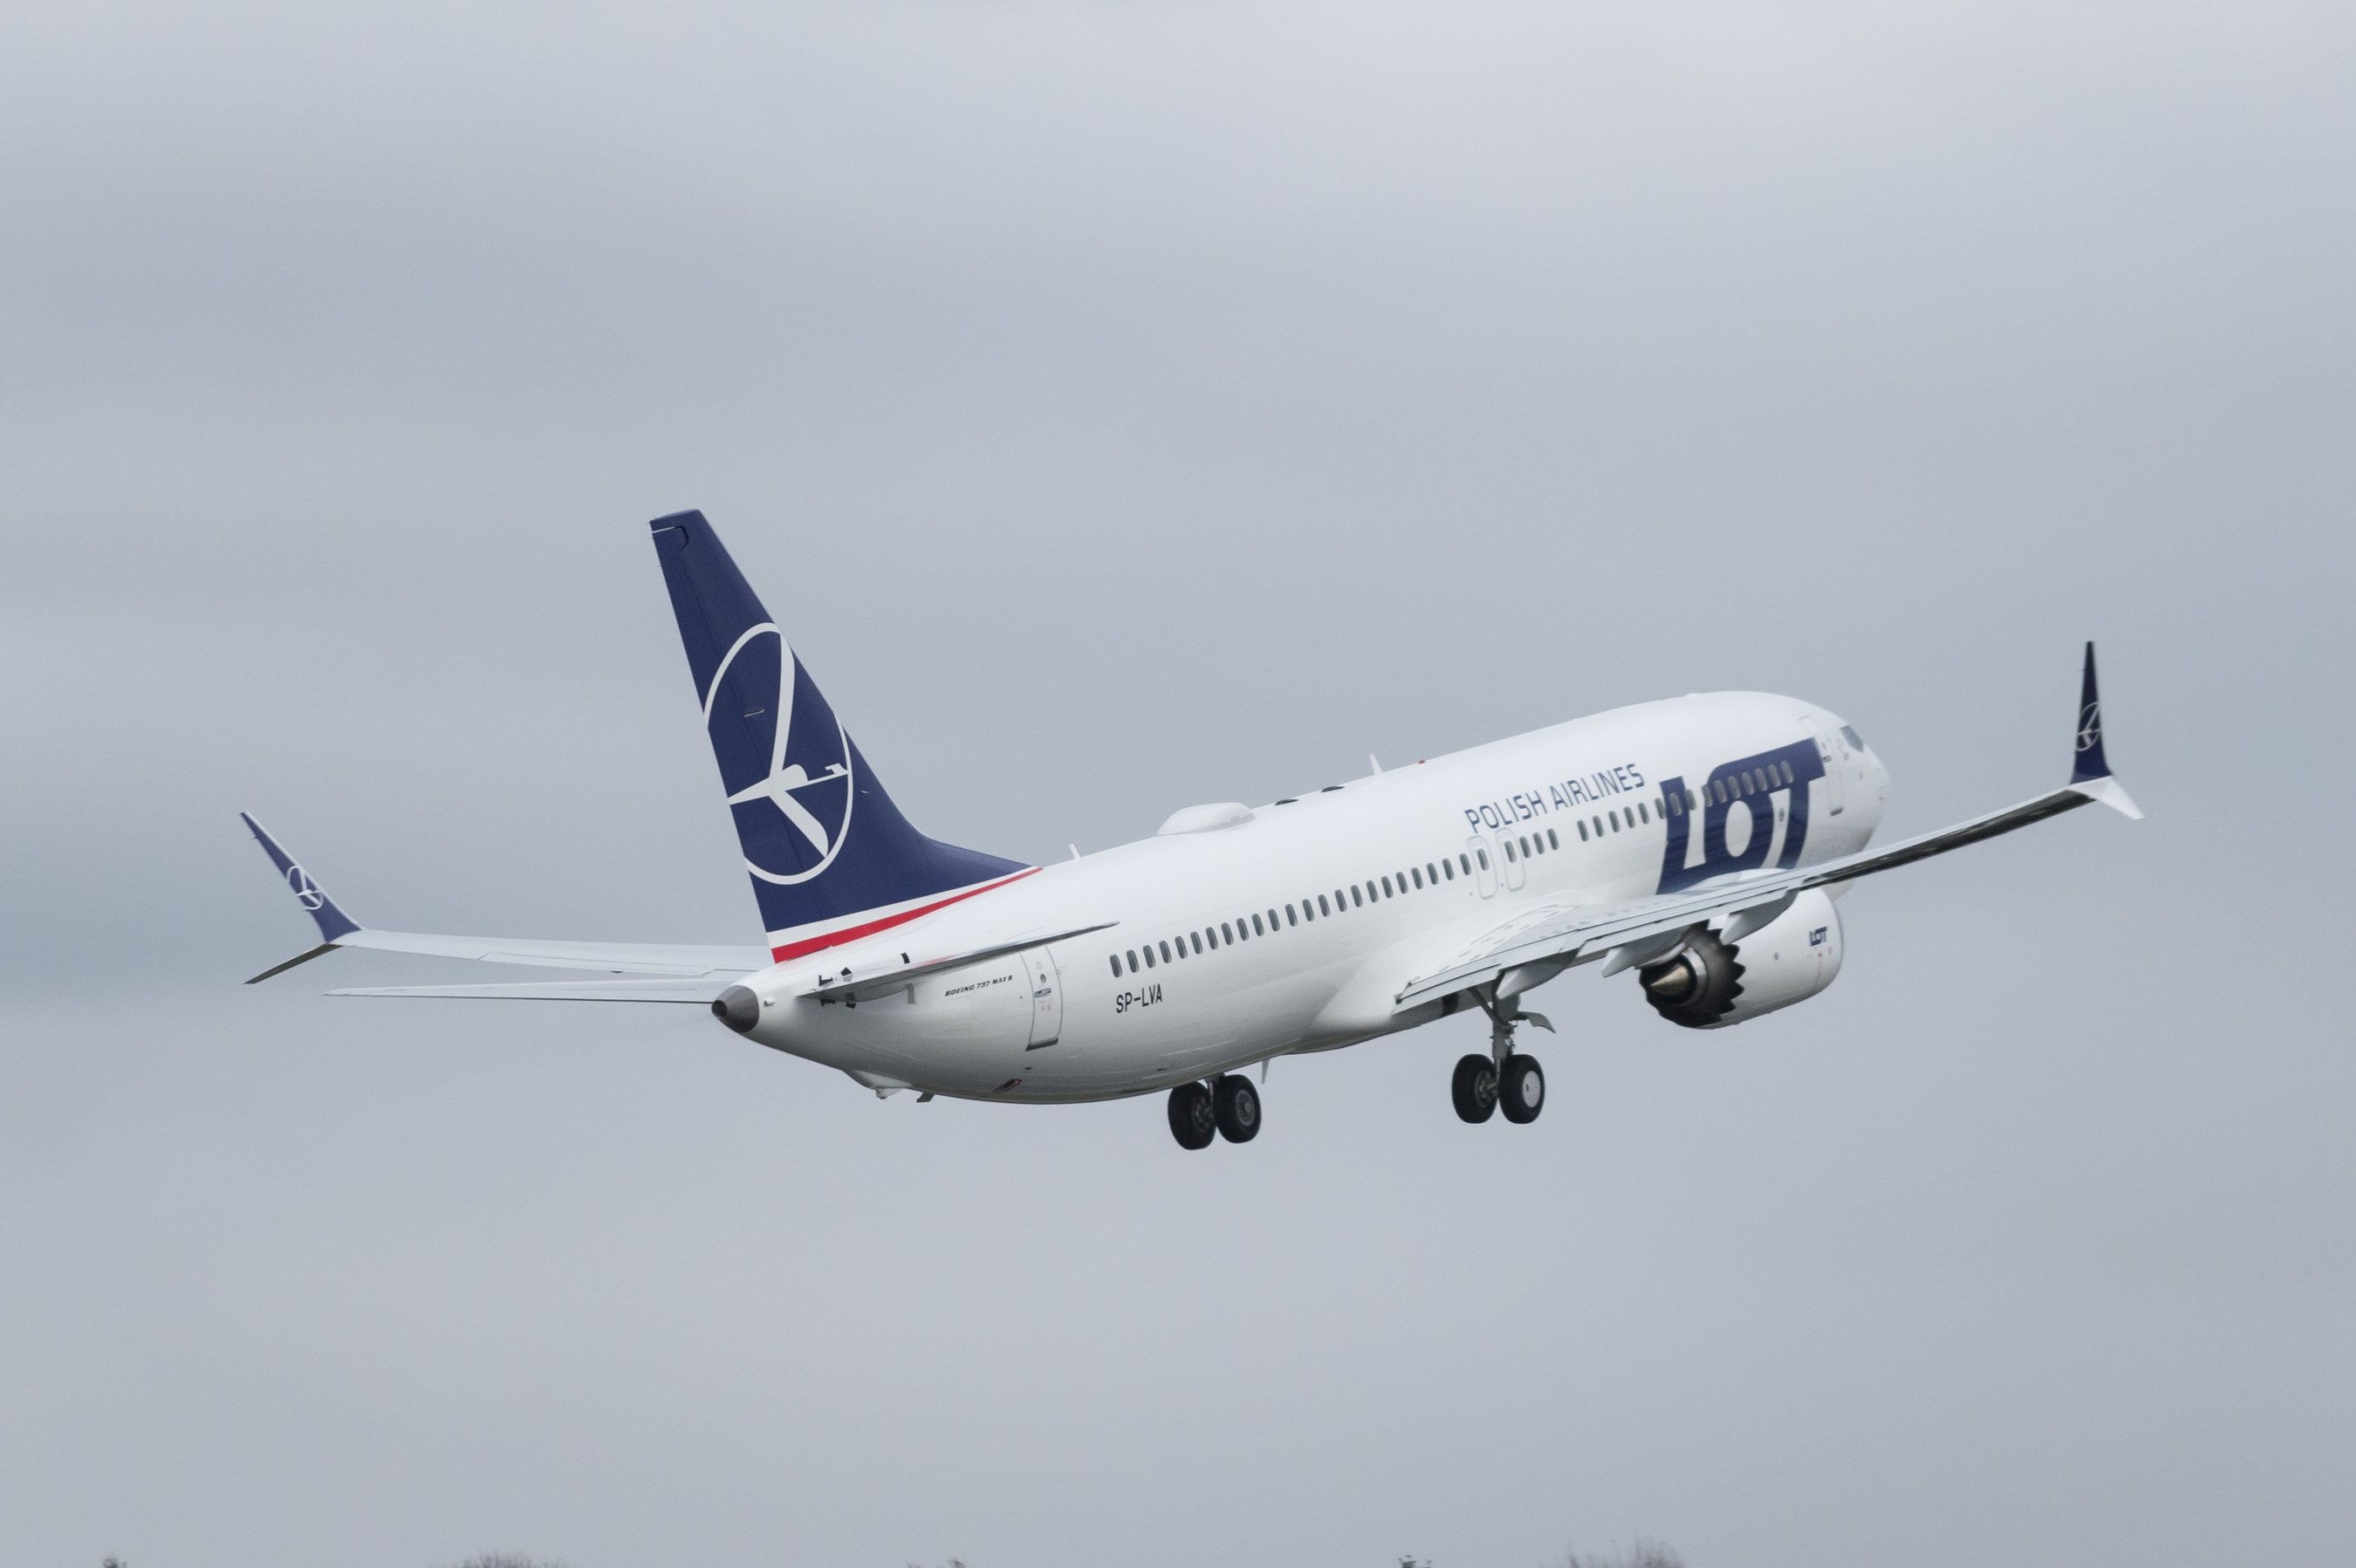 LOT Polish Airlines Boeing 737 MAX in flight